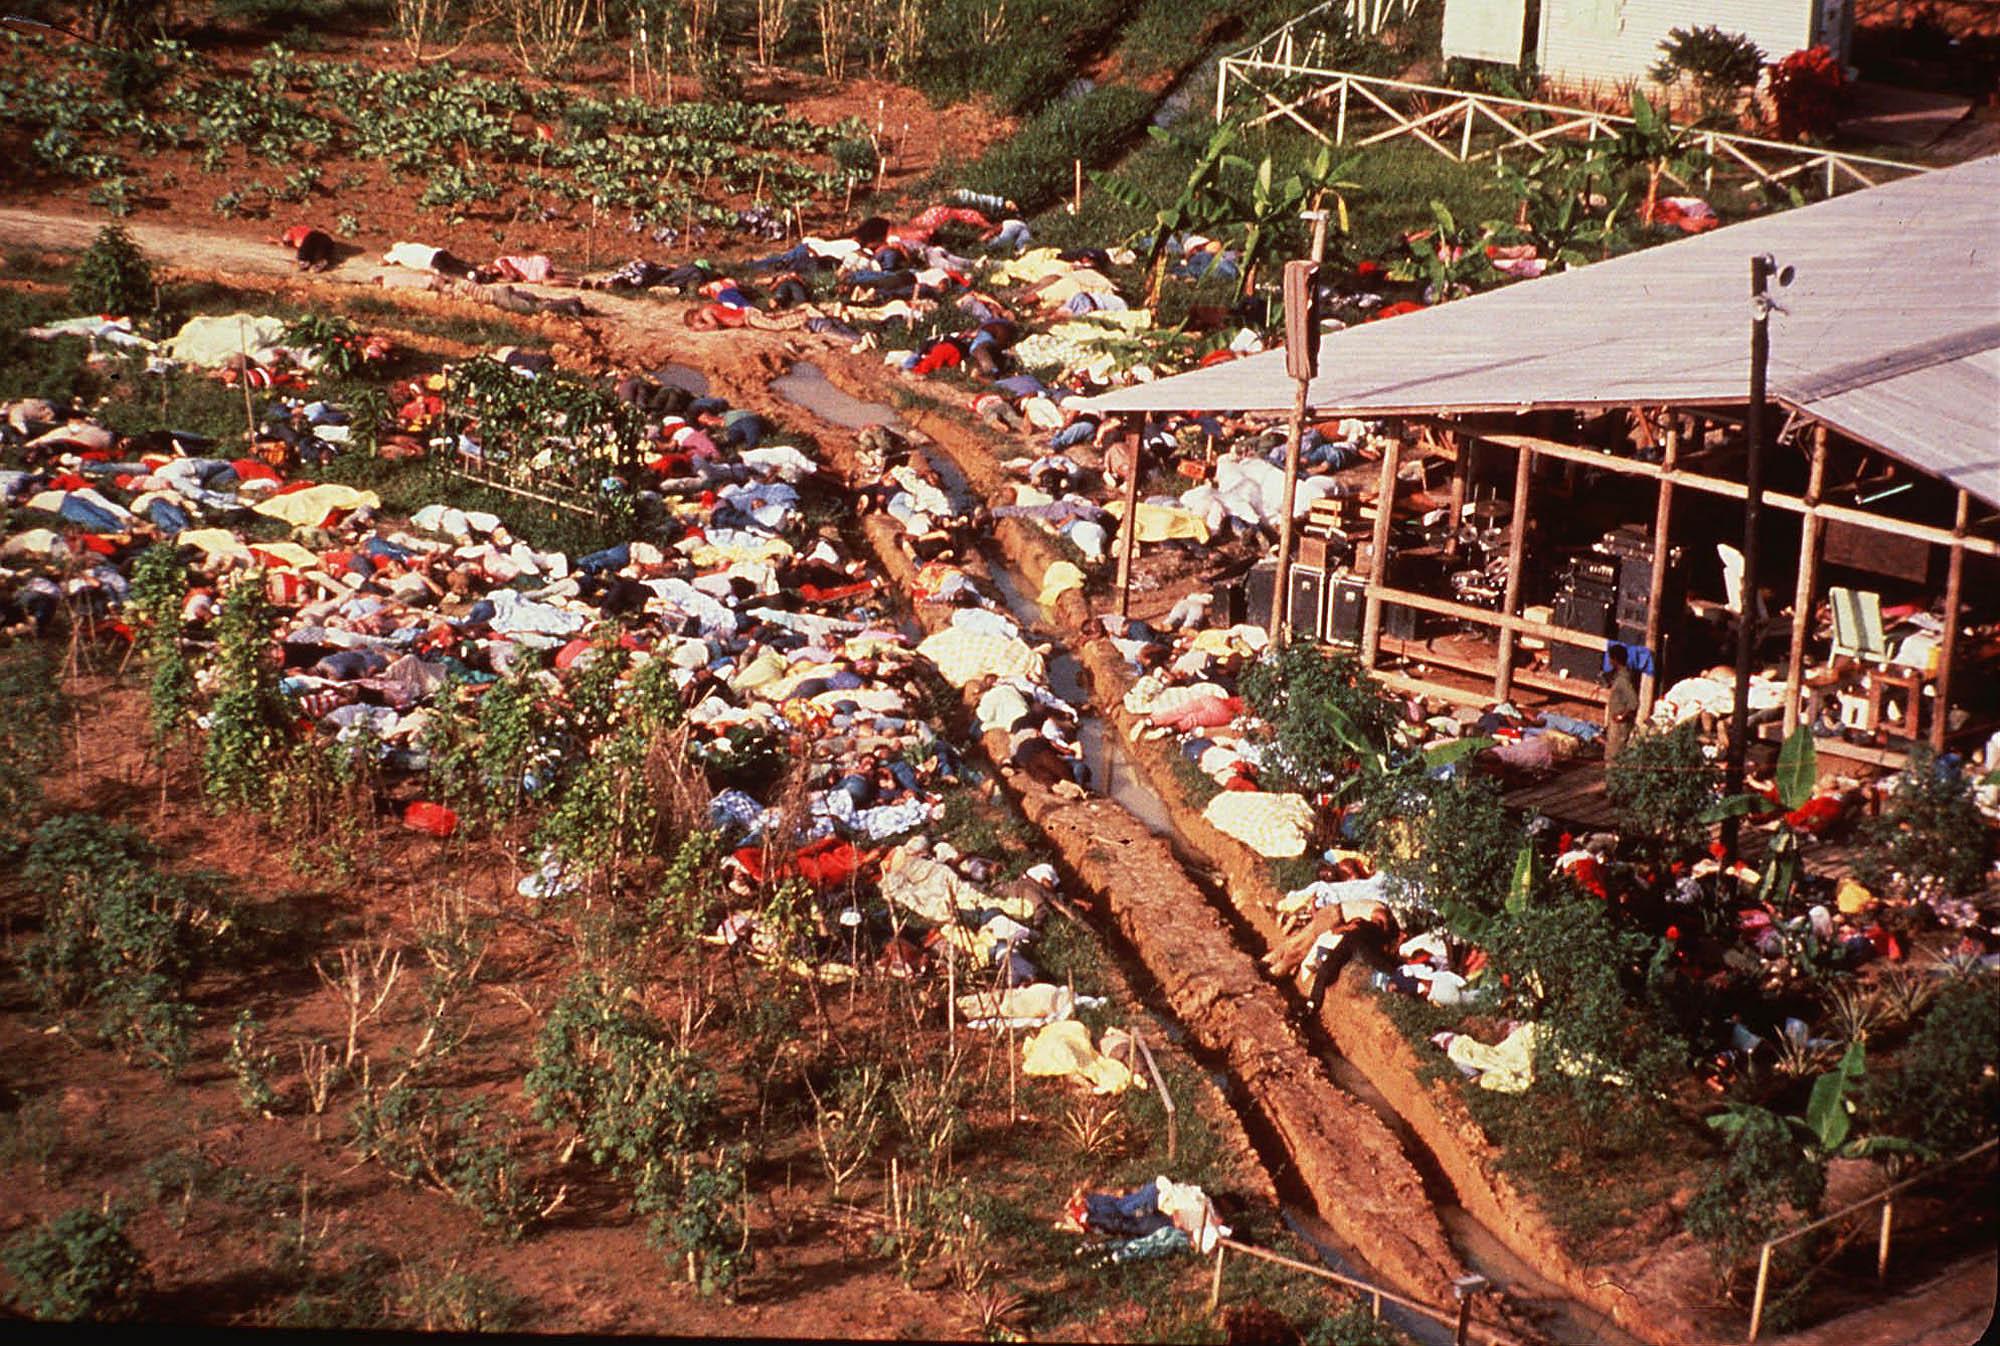 Jonestown The Life and Death of Peoples Temple (2006)